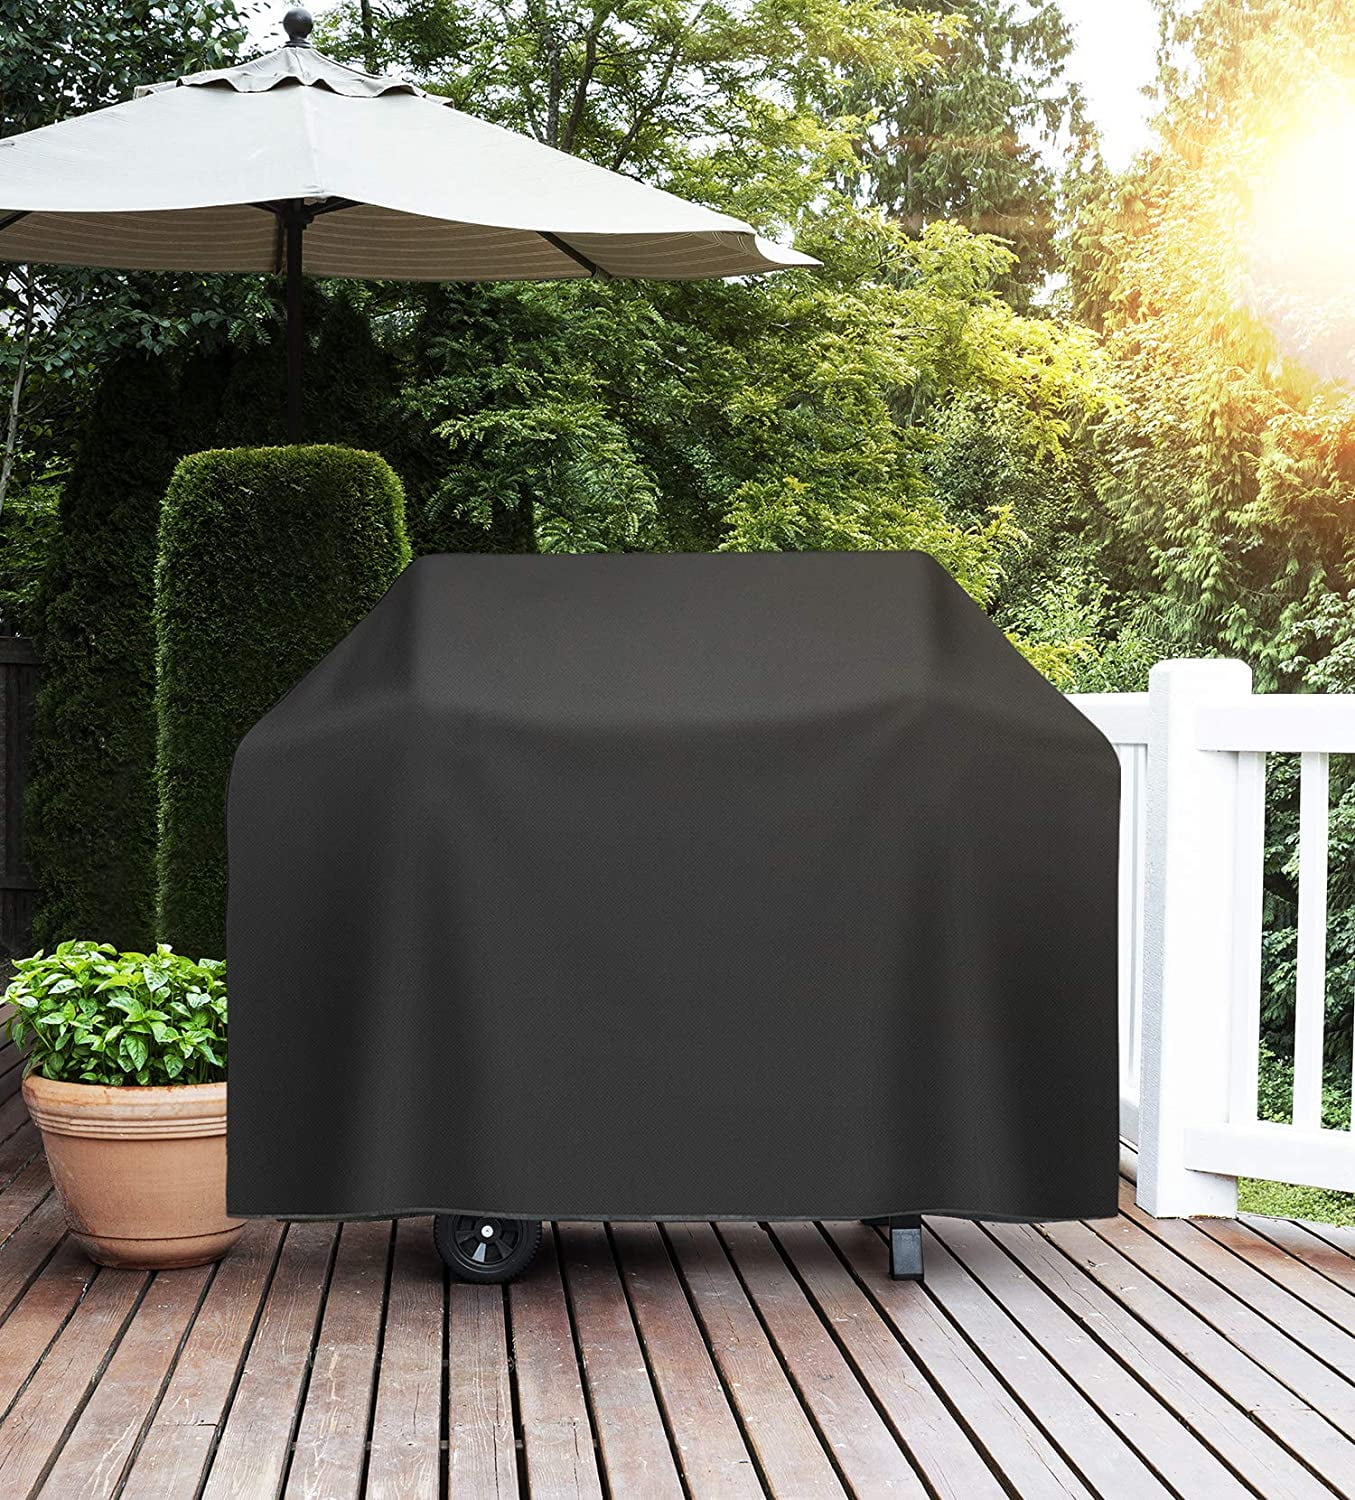 Heavy Duty 100% Waterproof BBQ Gas Grill Cover for Char-Broil 3 4 & 5 Burner 